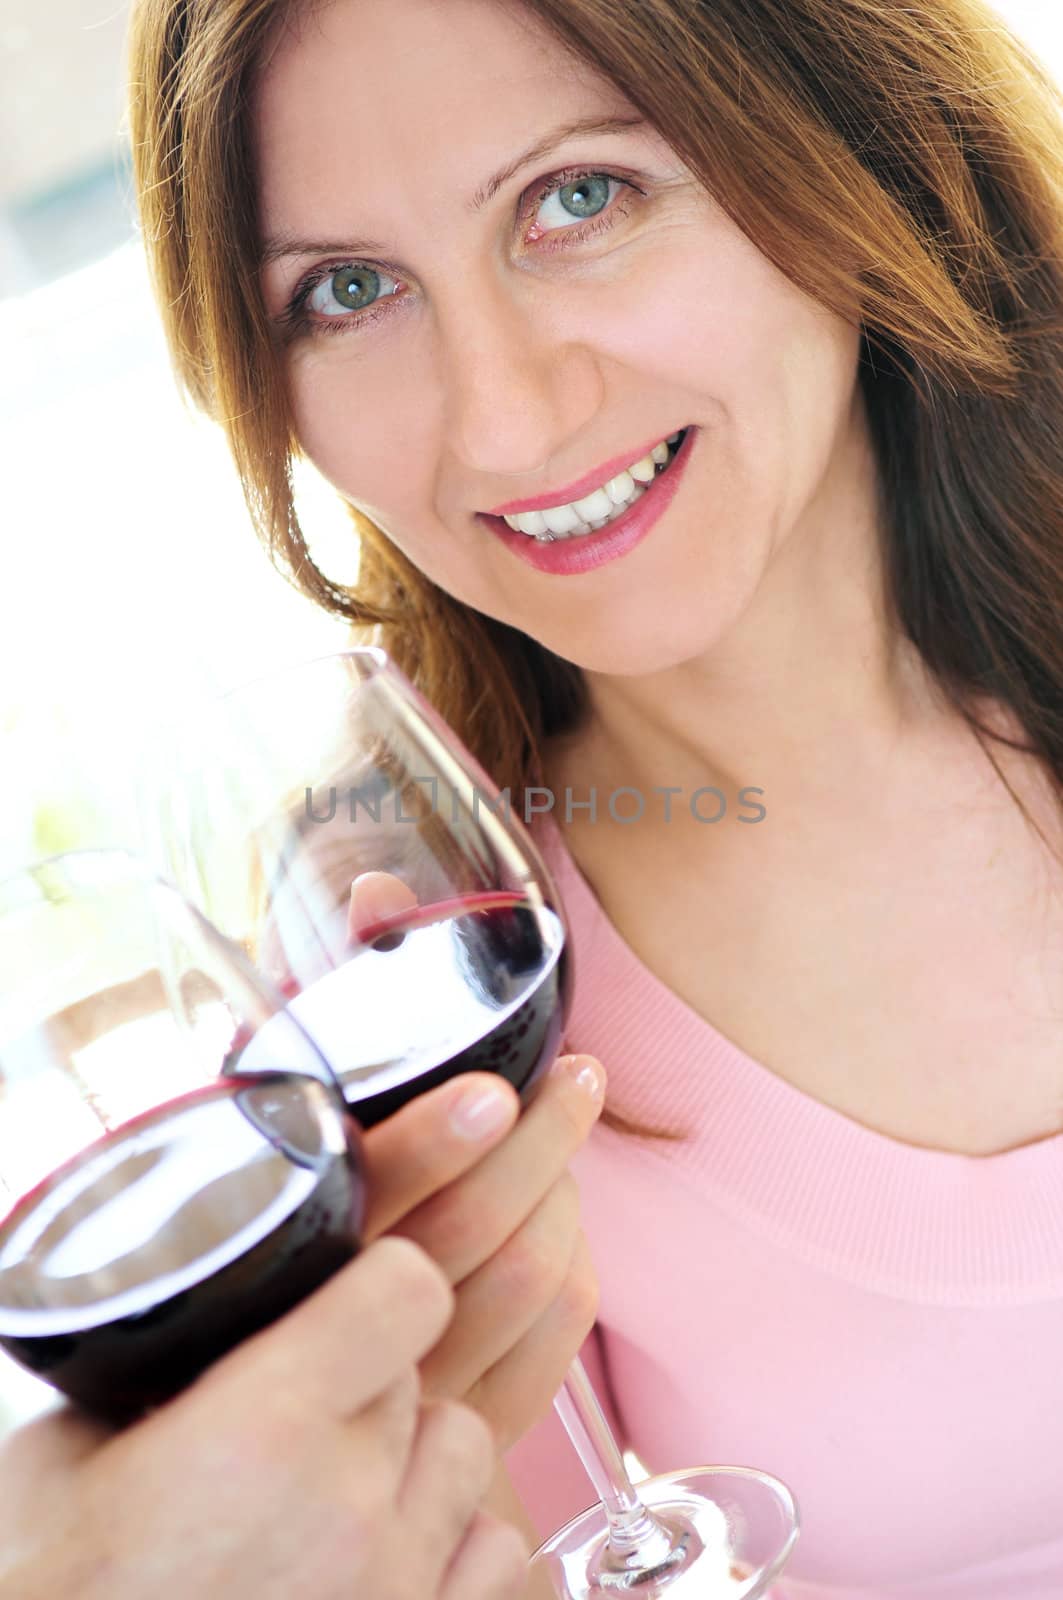 Mature woman toasting with a glass of red wine